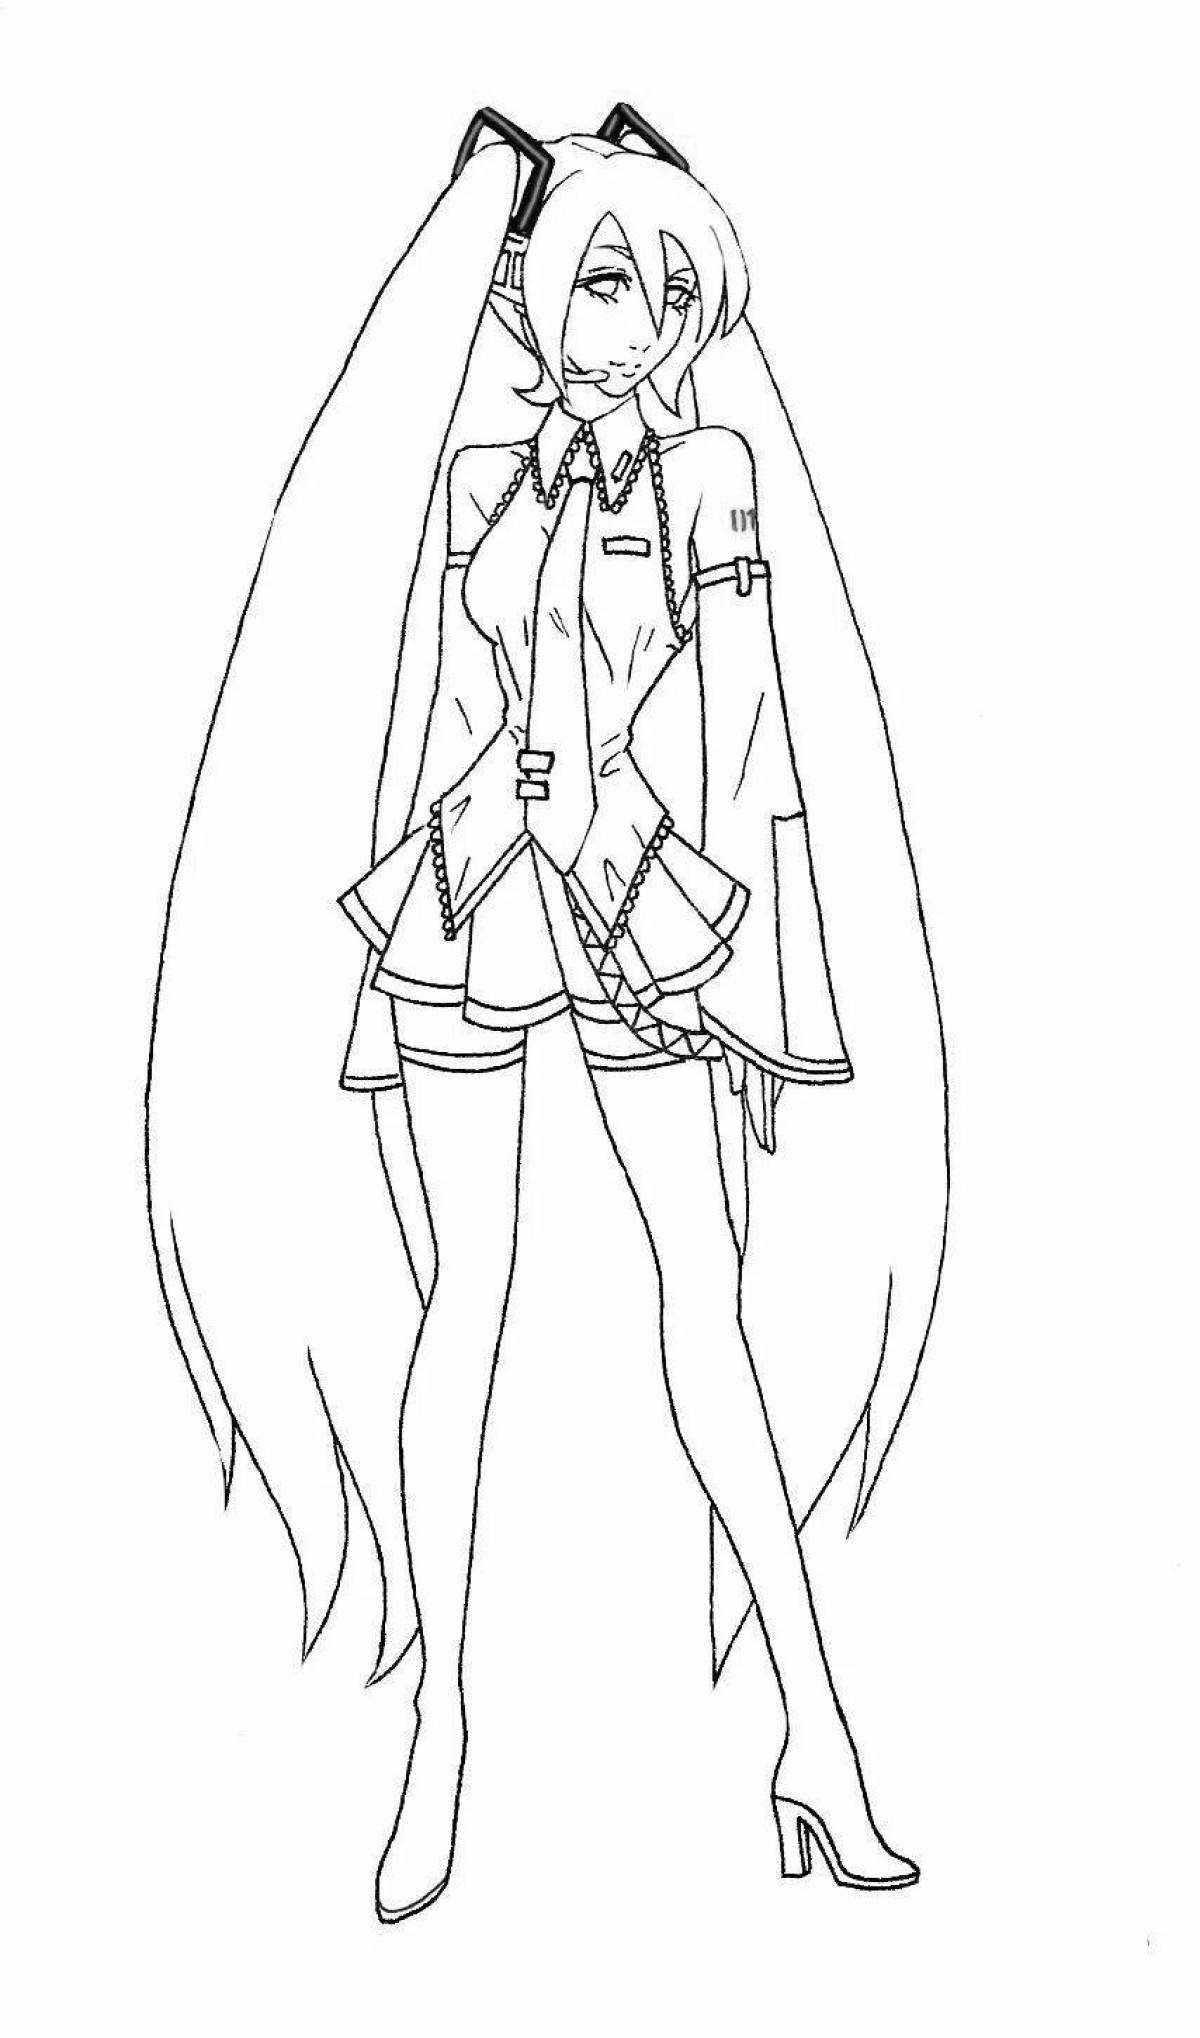 Magic vocaloid coloring page